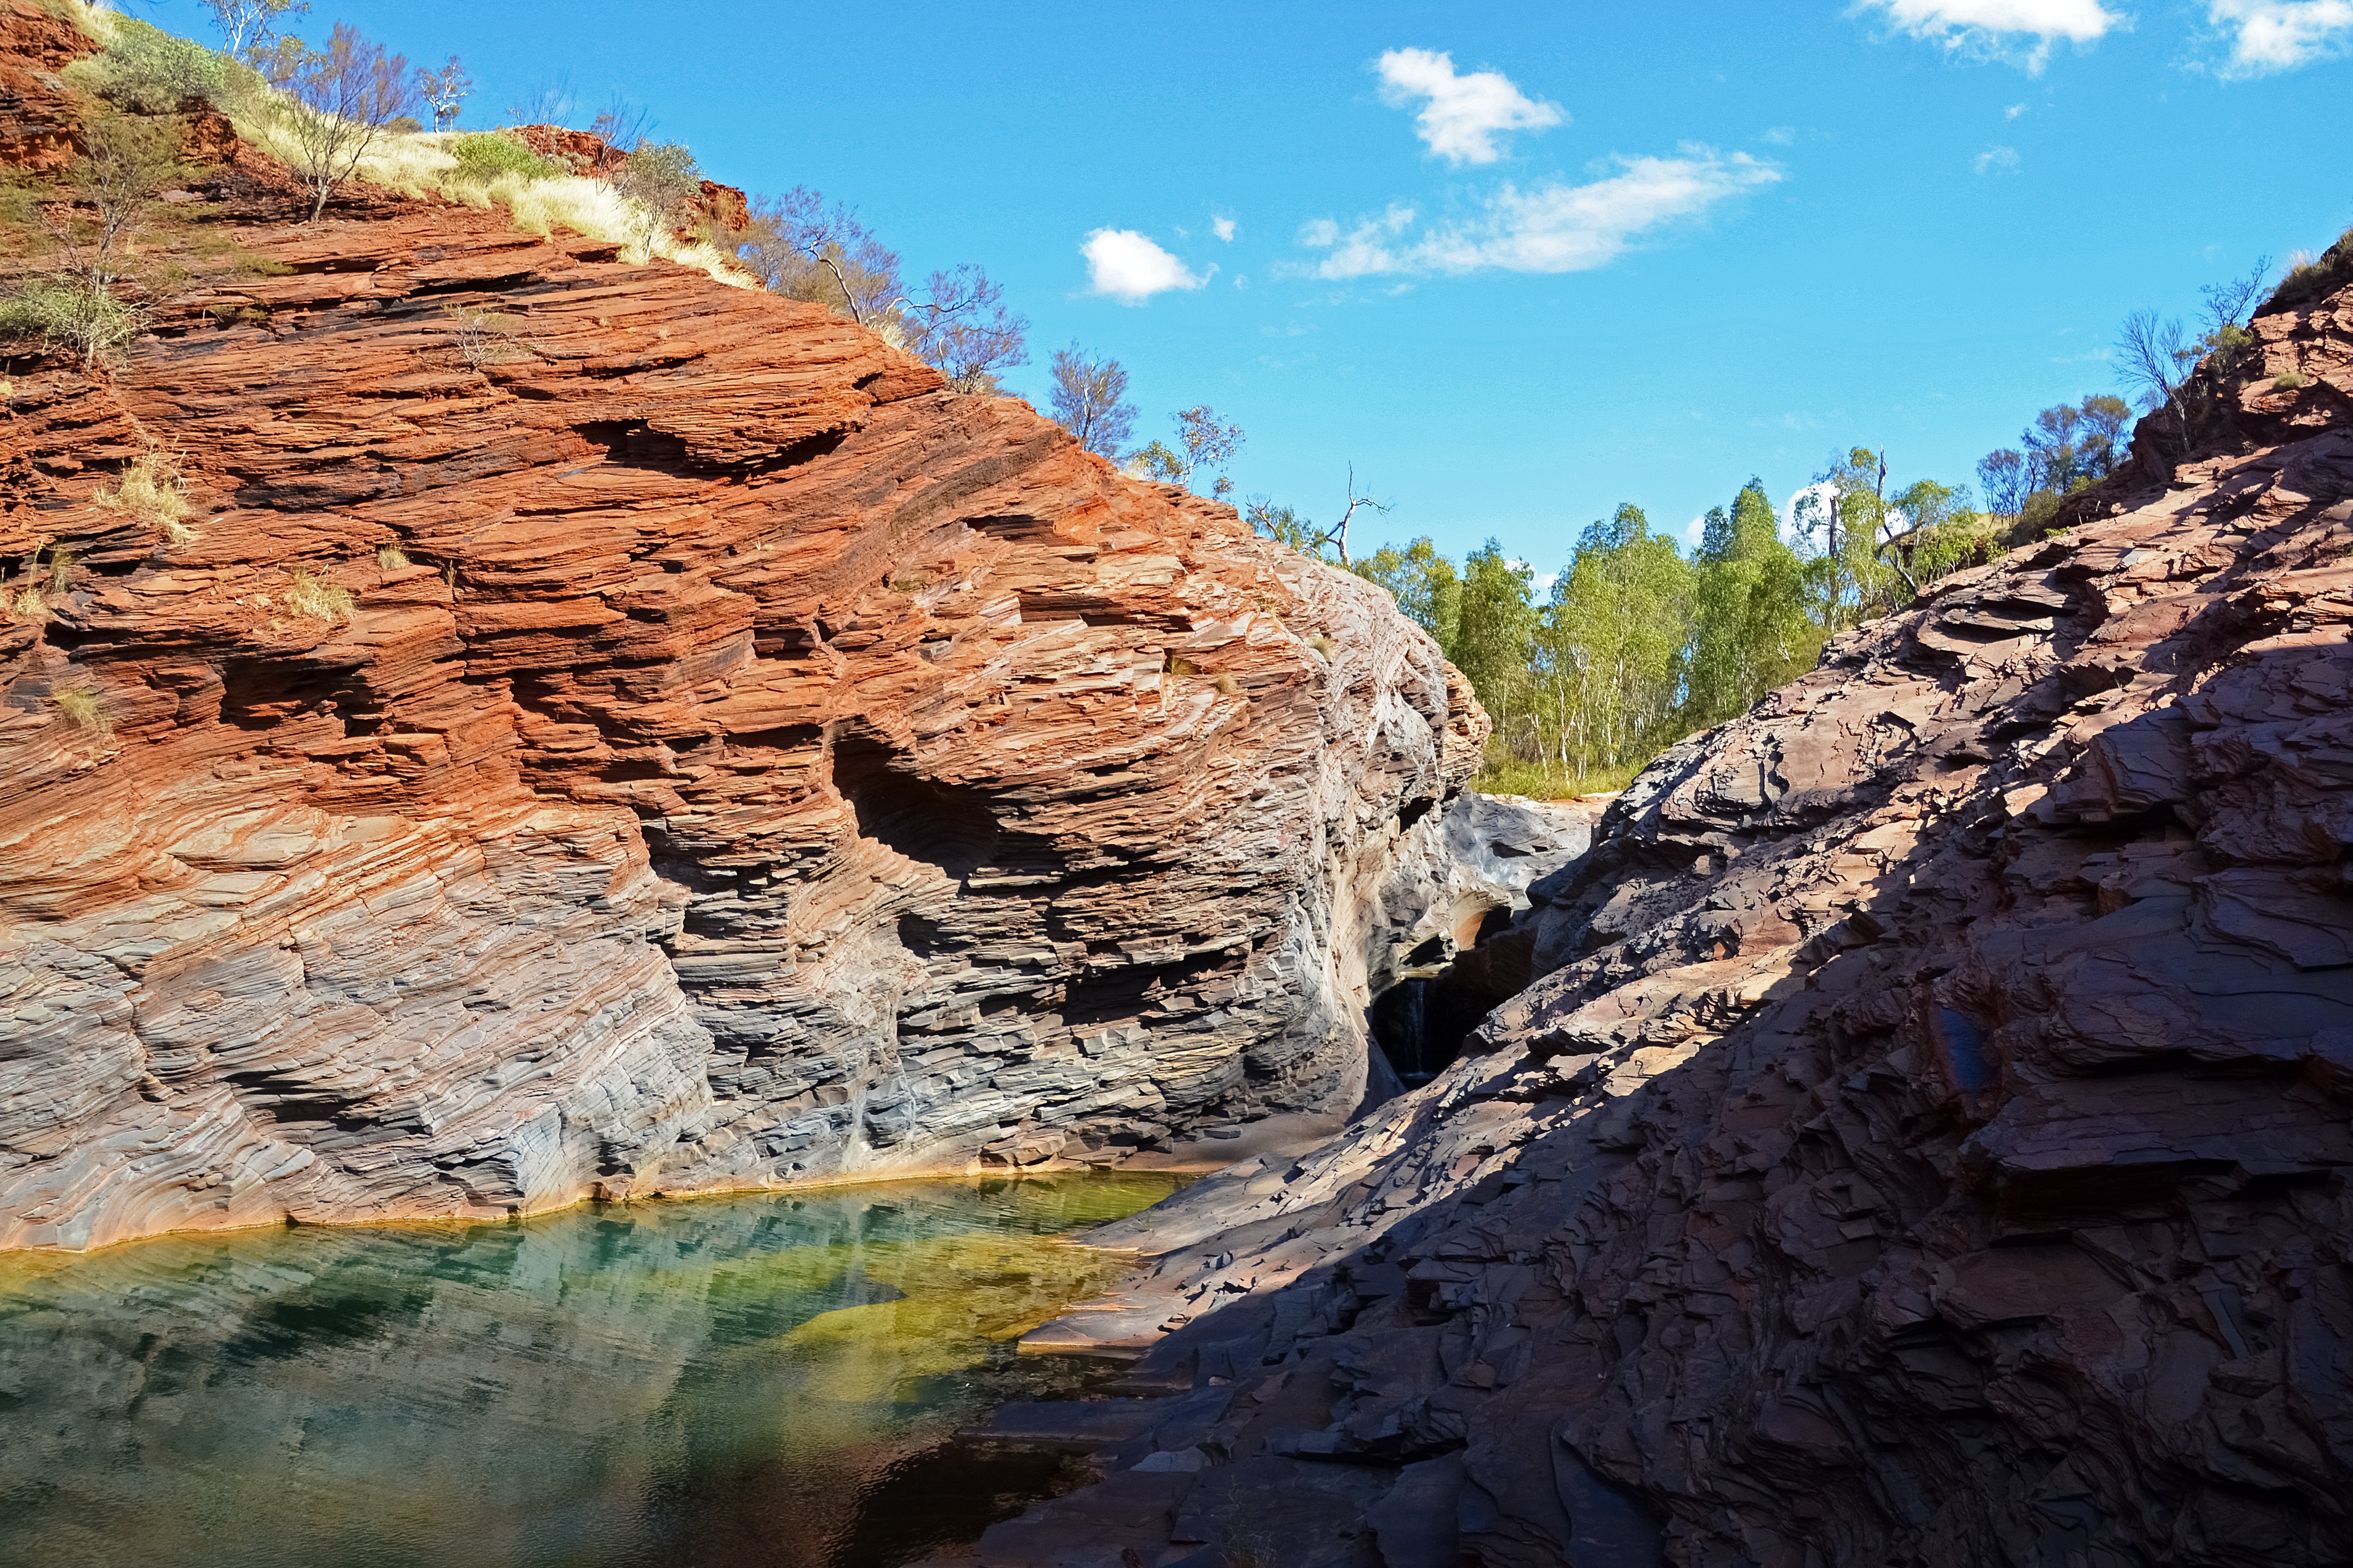 brown rock formation near green trees and body of water during daytime